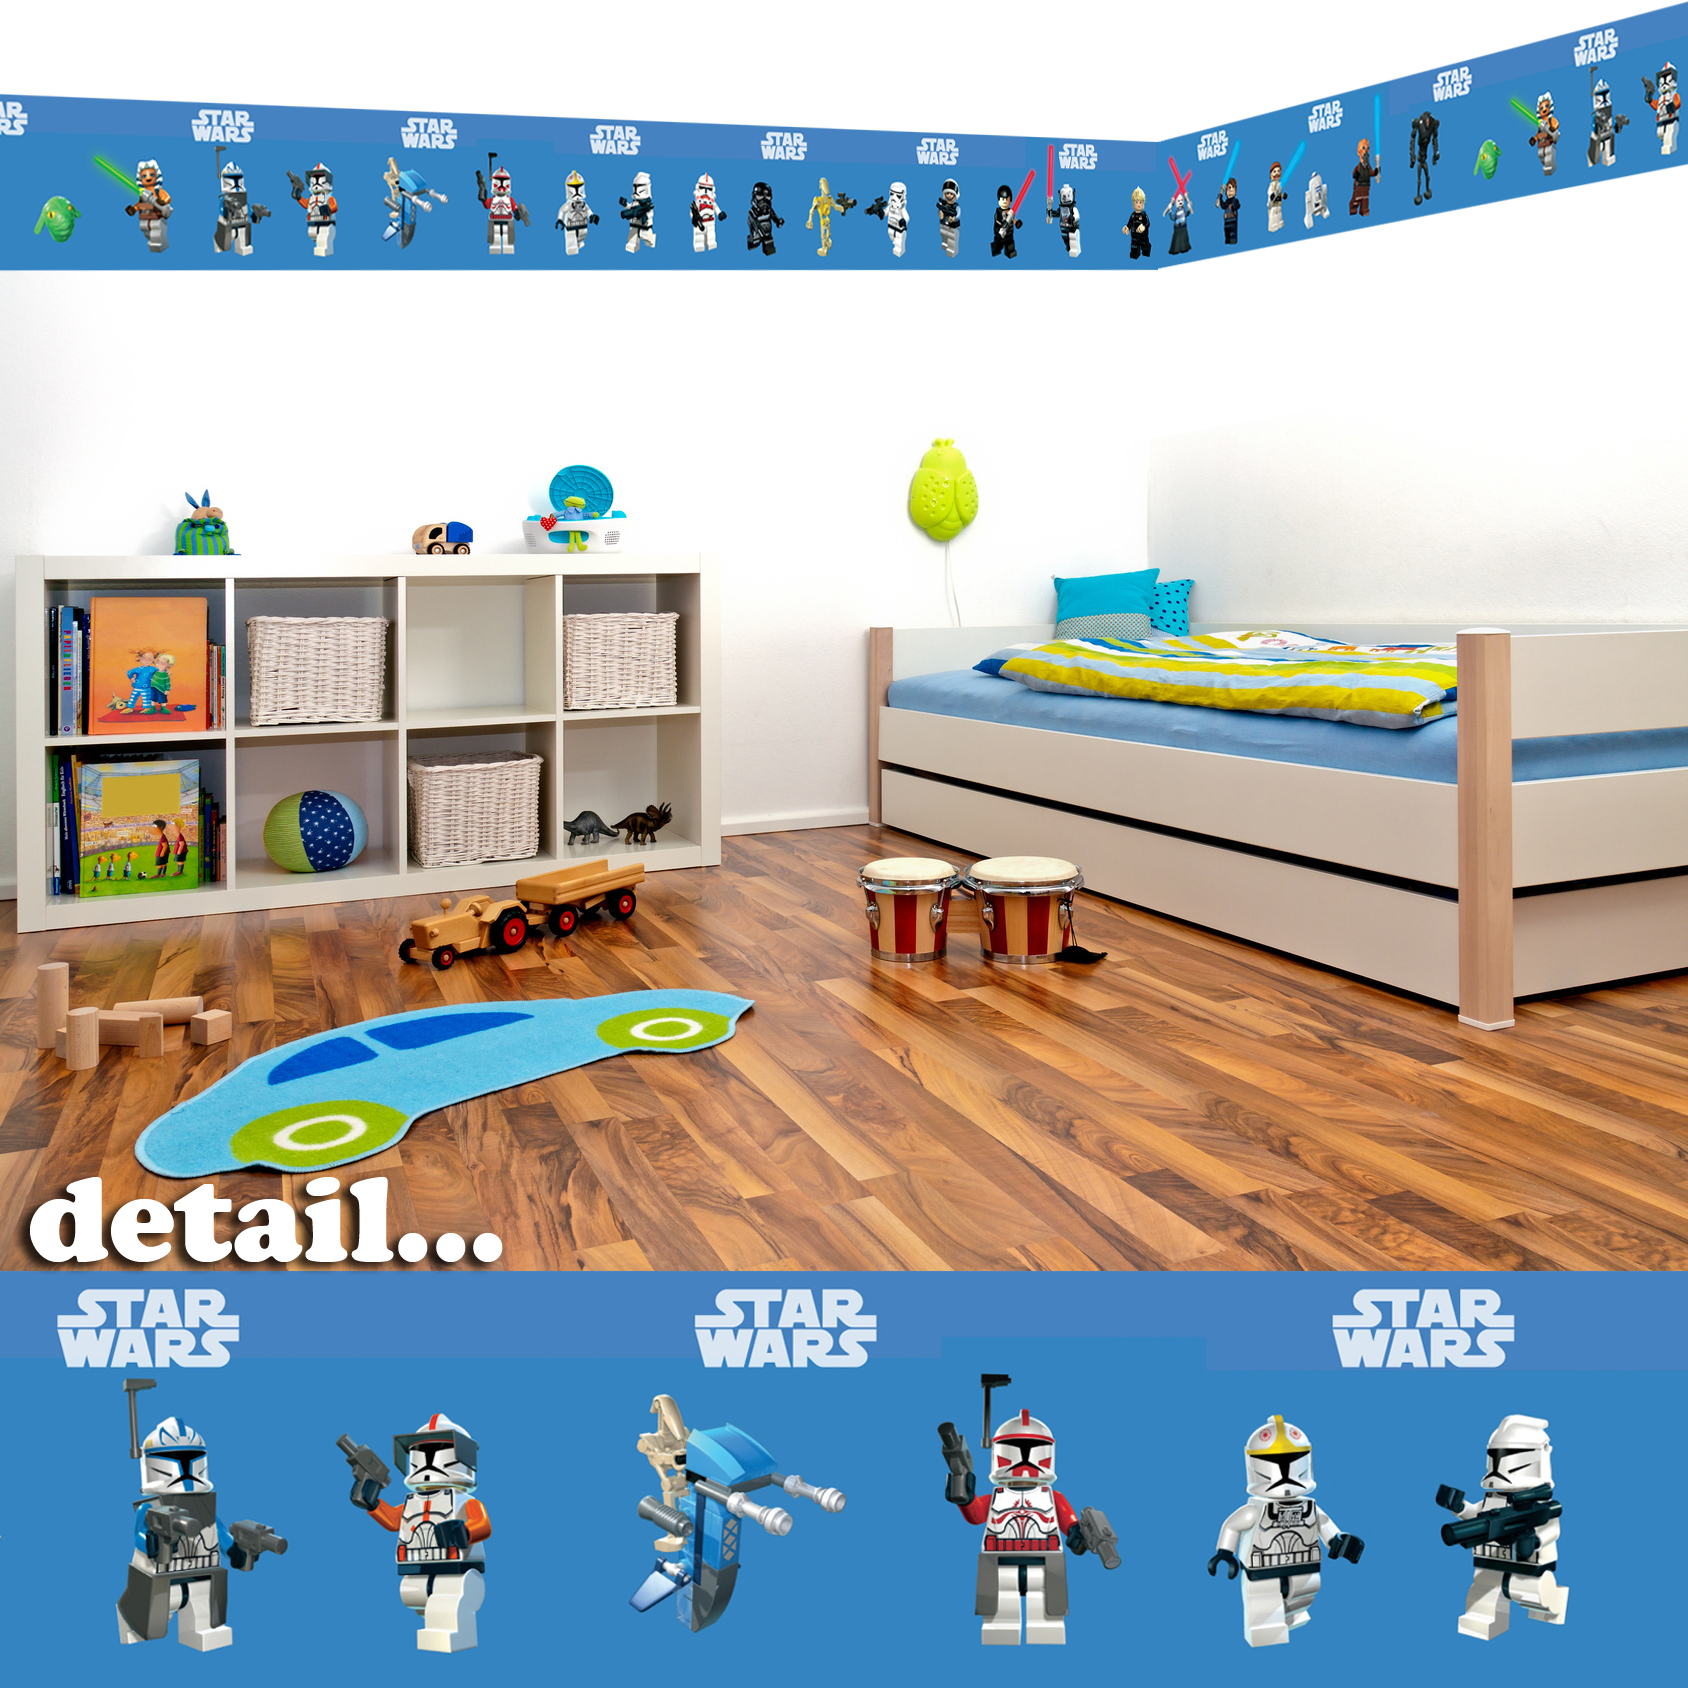 Details about Lego Star Wars Self Adhesive Decorative Wall Border   5 1688x1688